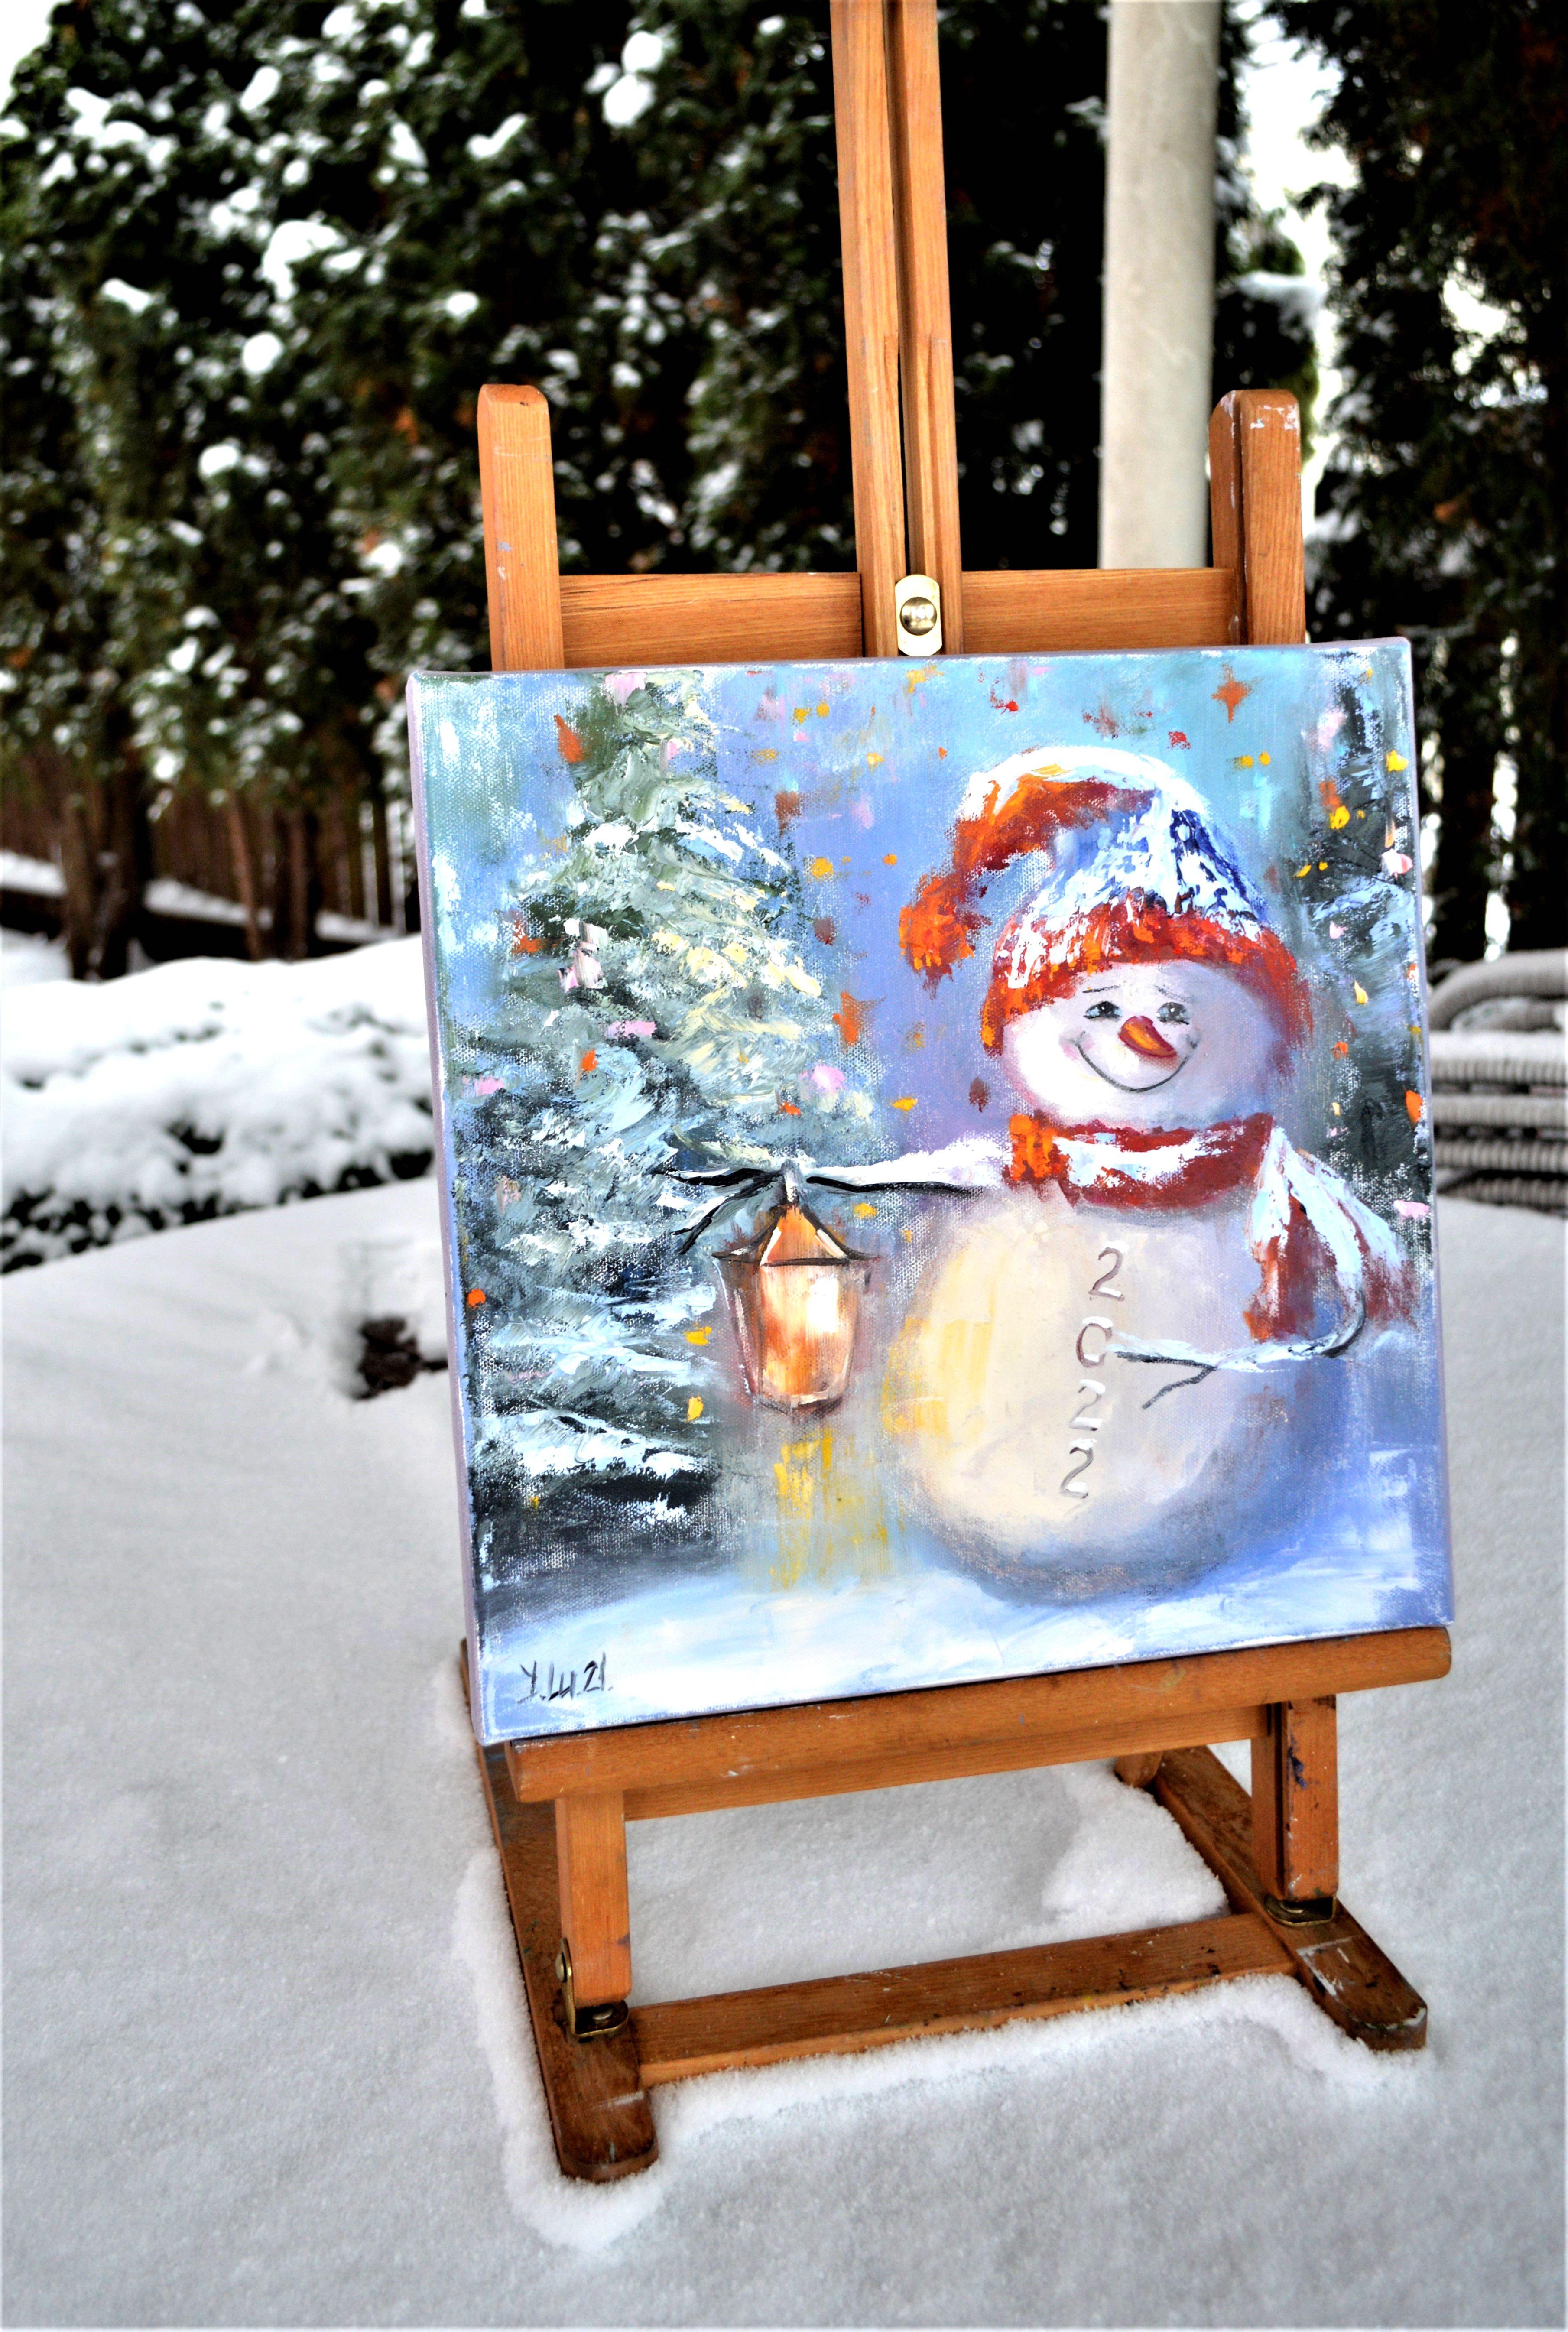 In this oil painting, I've captured a moment of pure, childlike wonder—a cheerful snowman set against a winter twilight. Its bright, lively colors evoke innocence and nostalgia, inviting warmth and joy into your home. With playful brushstrokes and a